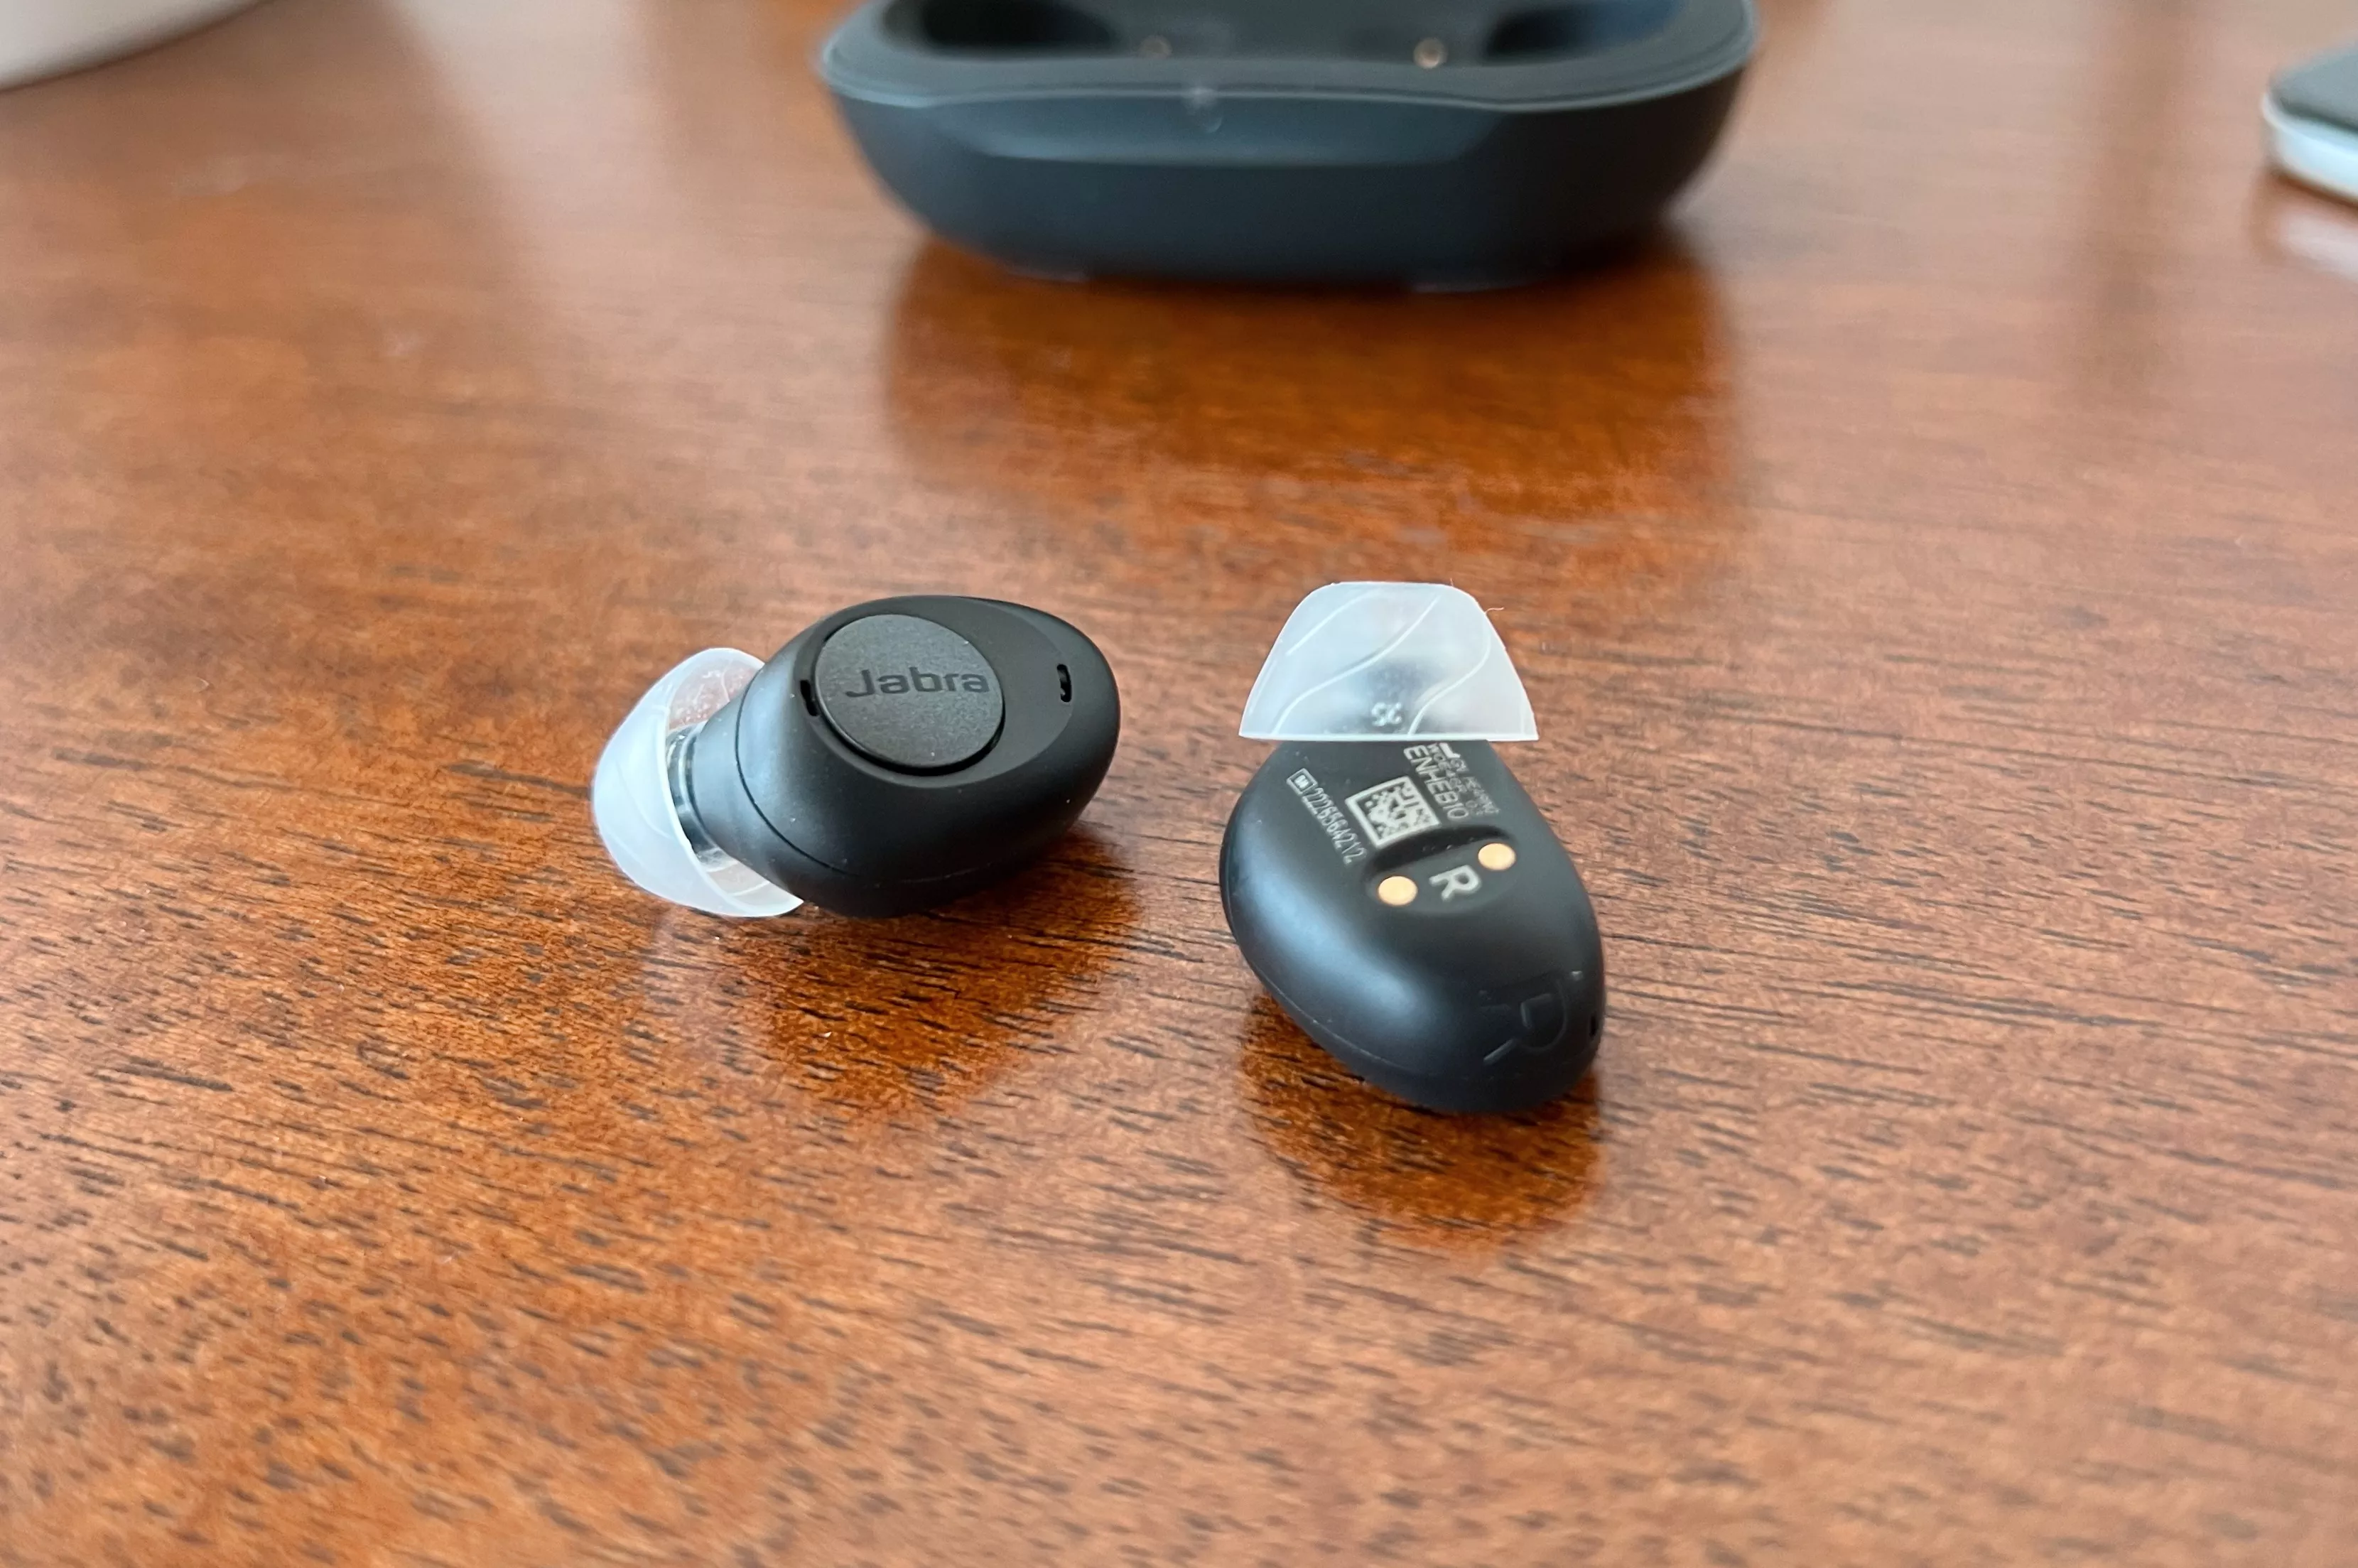 Jabra Enhance Plus Are Wireless Earbuds for Those With Mild to Moderate  Hearing Loss